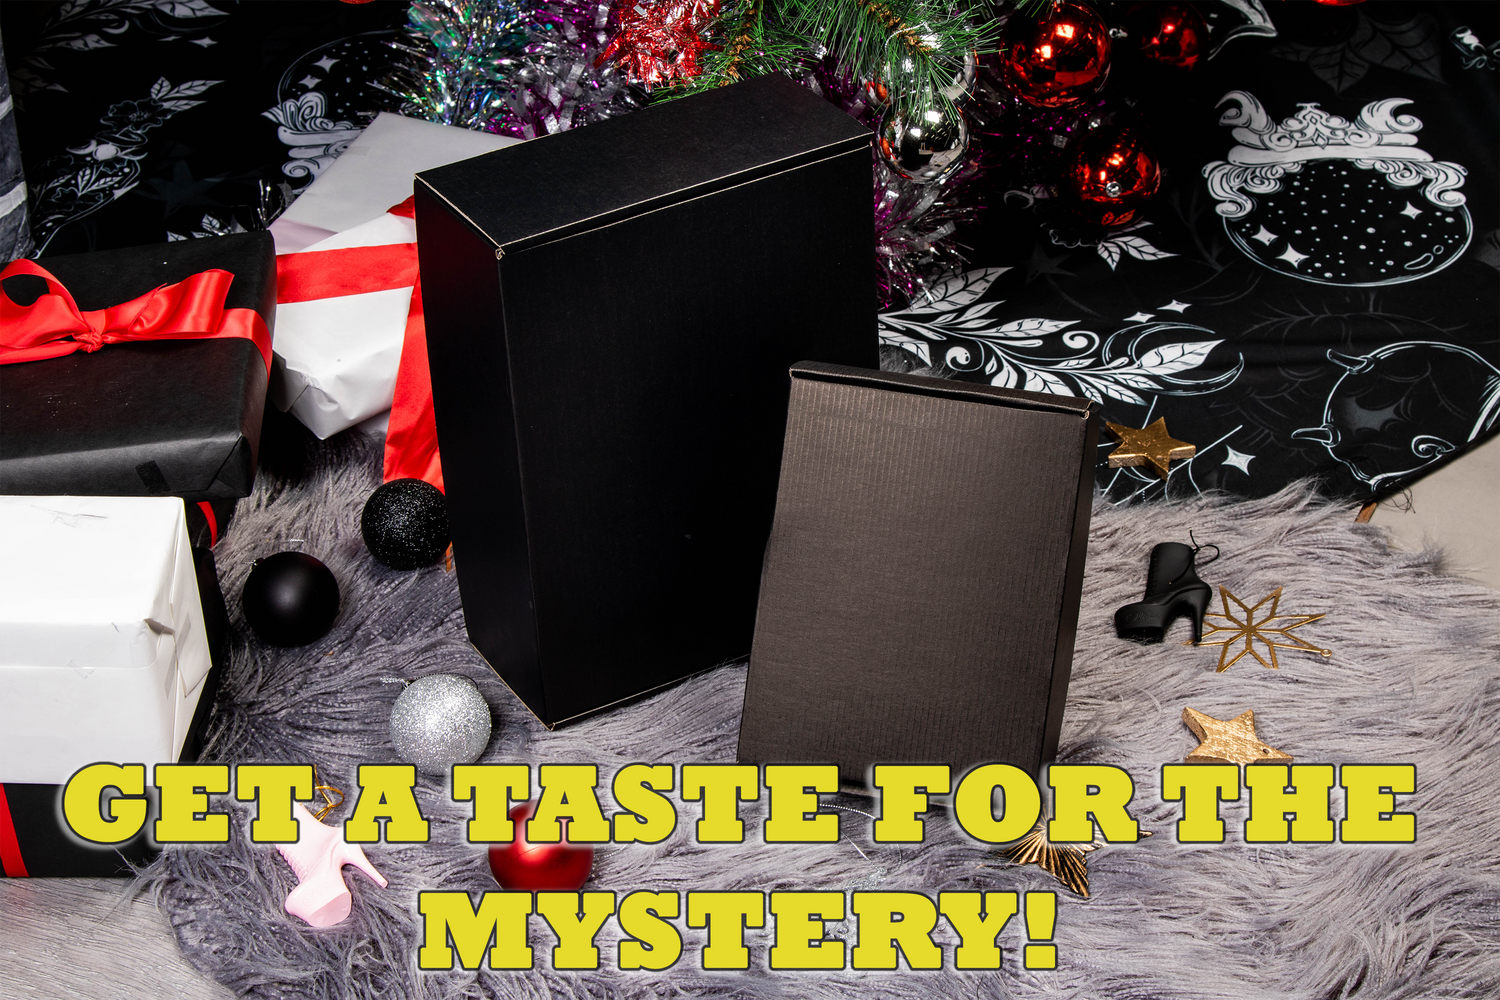 Introducing Mystery Box Tasters!